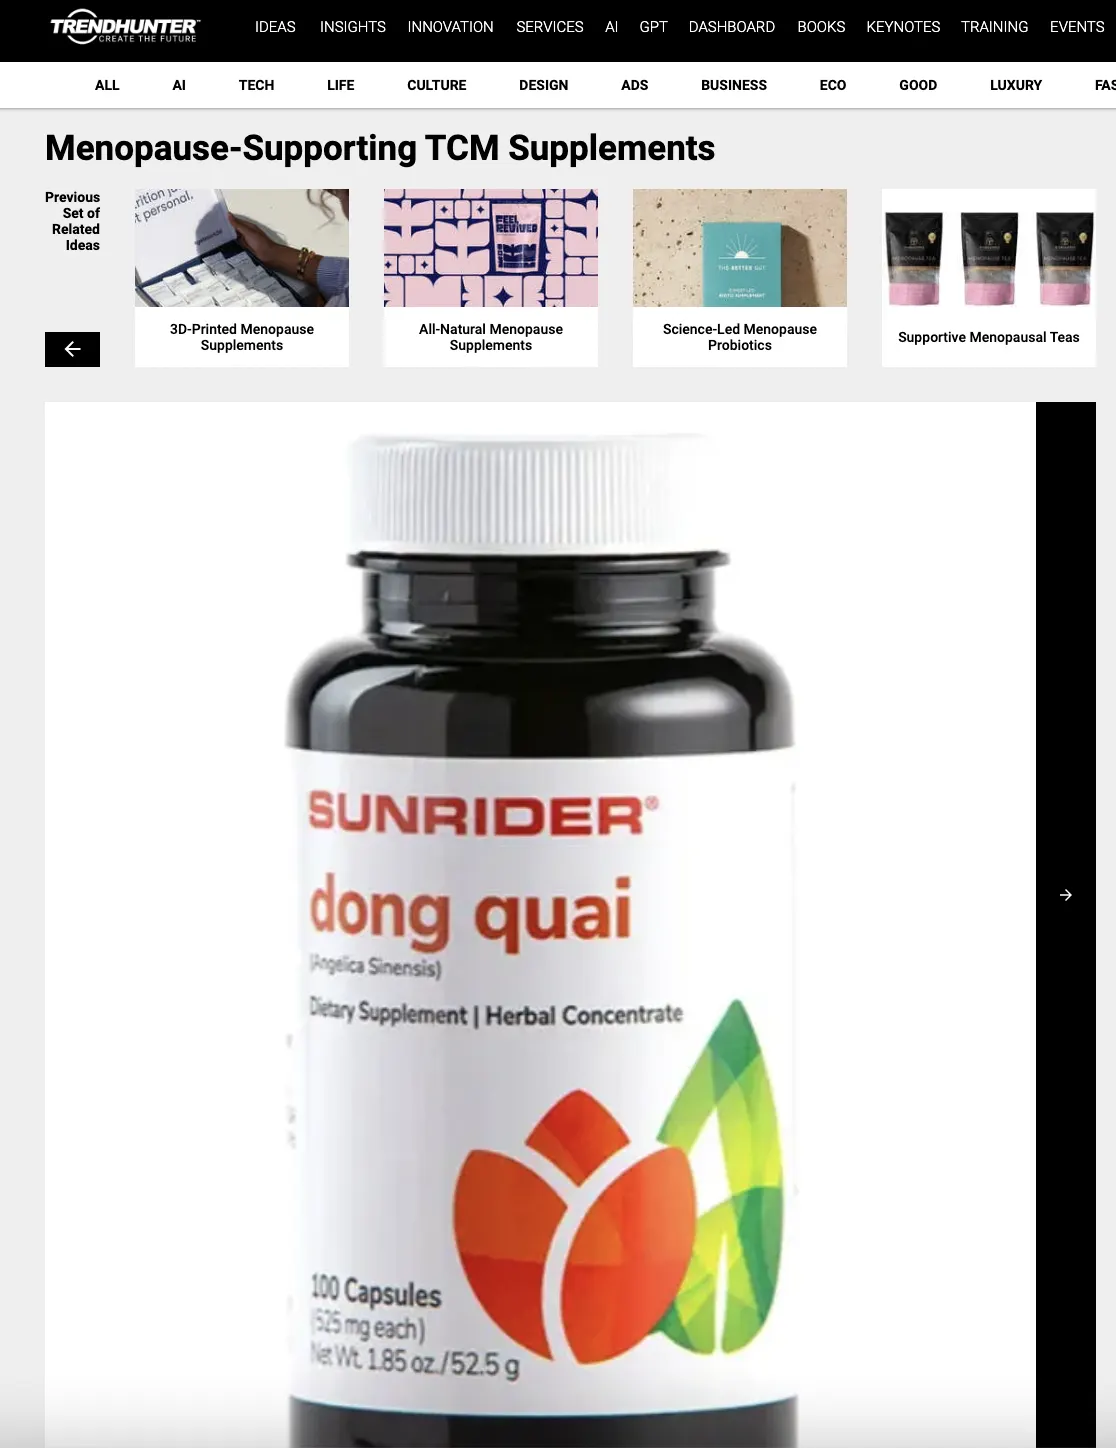 Sunrider’s Dong Quai Herbal Formula Featured in Trend Hunter 0